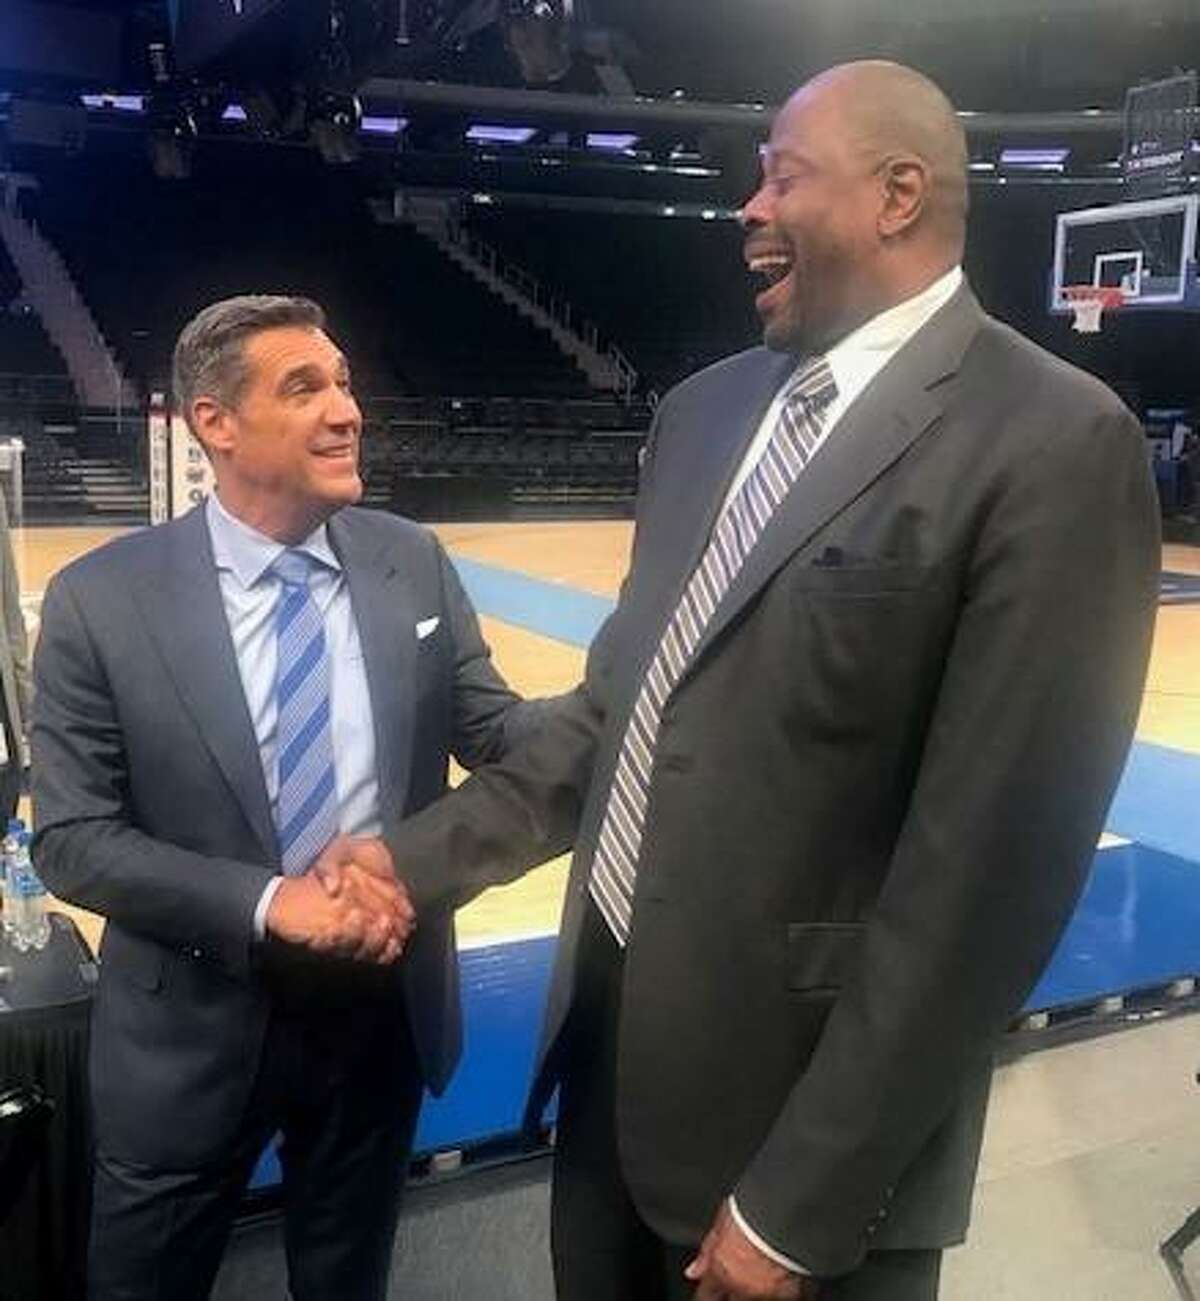 Villanova coach Jay Wright (left) shares a laugh with Georgetown coach Patrick Ewing at Big East Media Day on Thursday at Madison Square Garden.